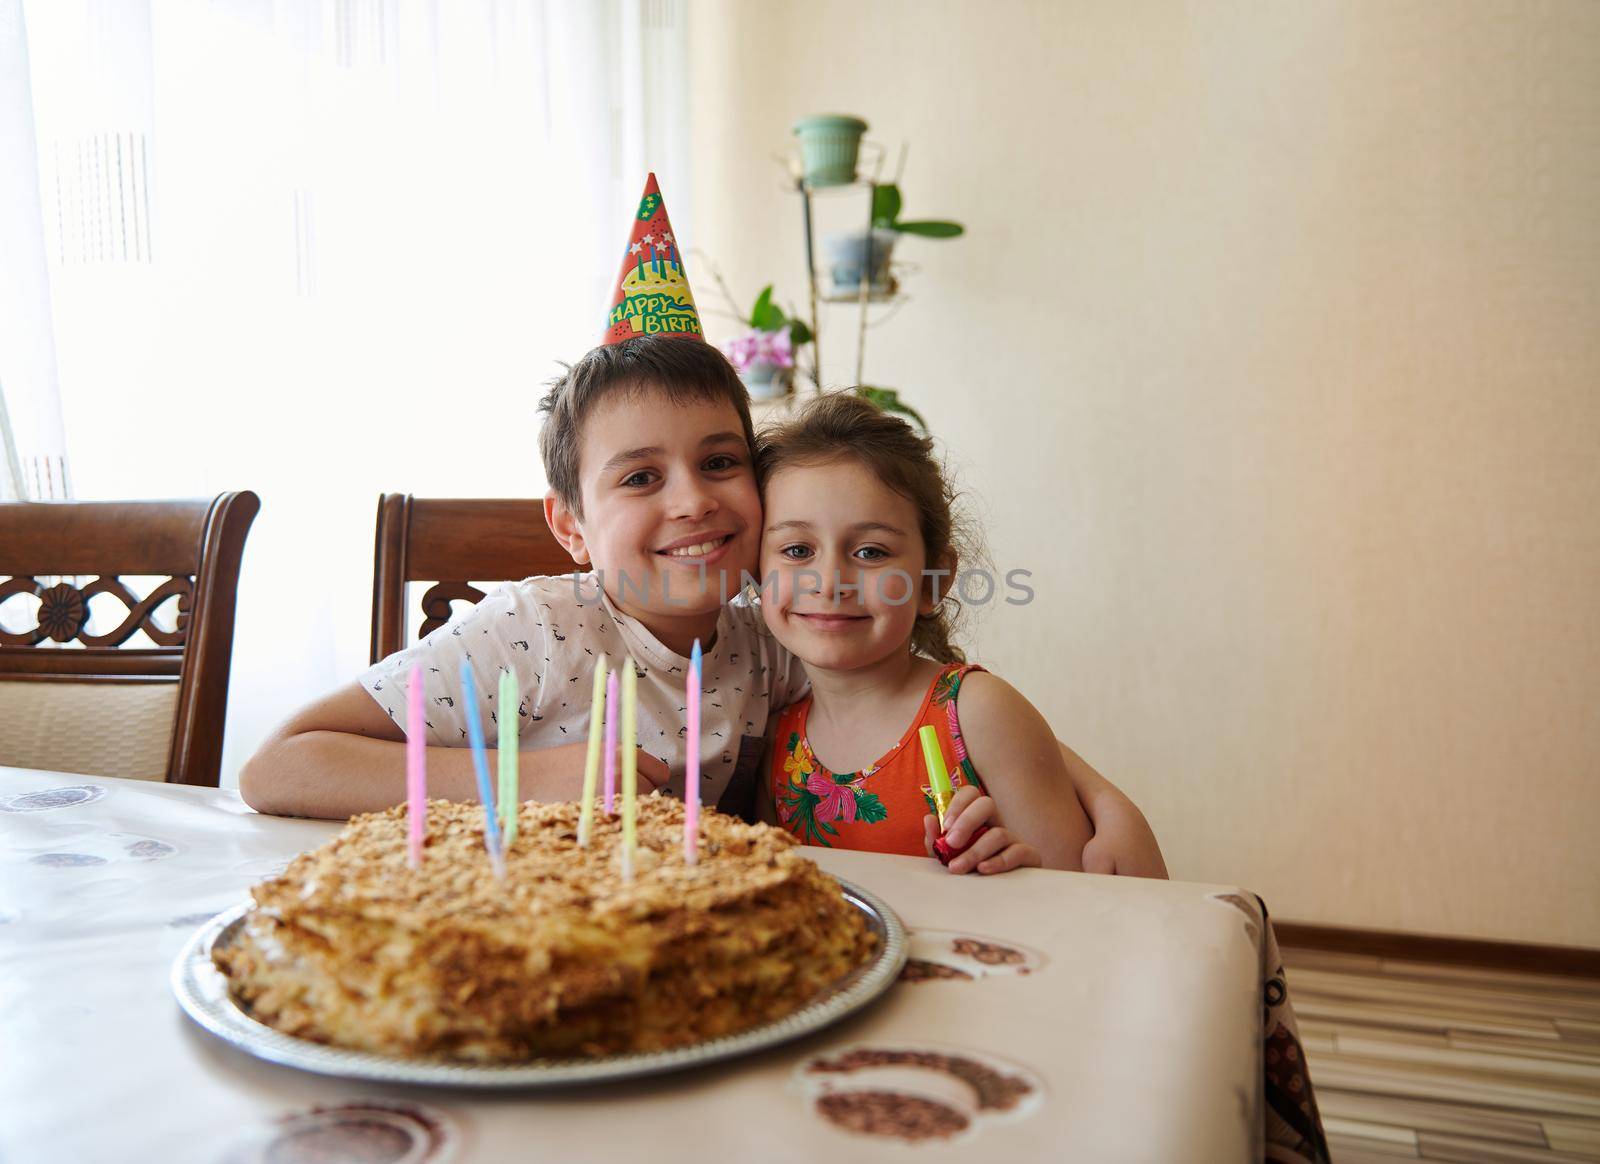 Portrait of two adorable cute Caucasian children, brother and sister, sitting at the table with a birthday cake decorated with long colorful candles. Anniversary and birthday party concept